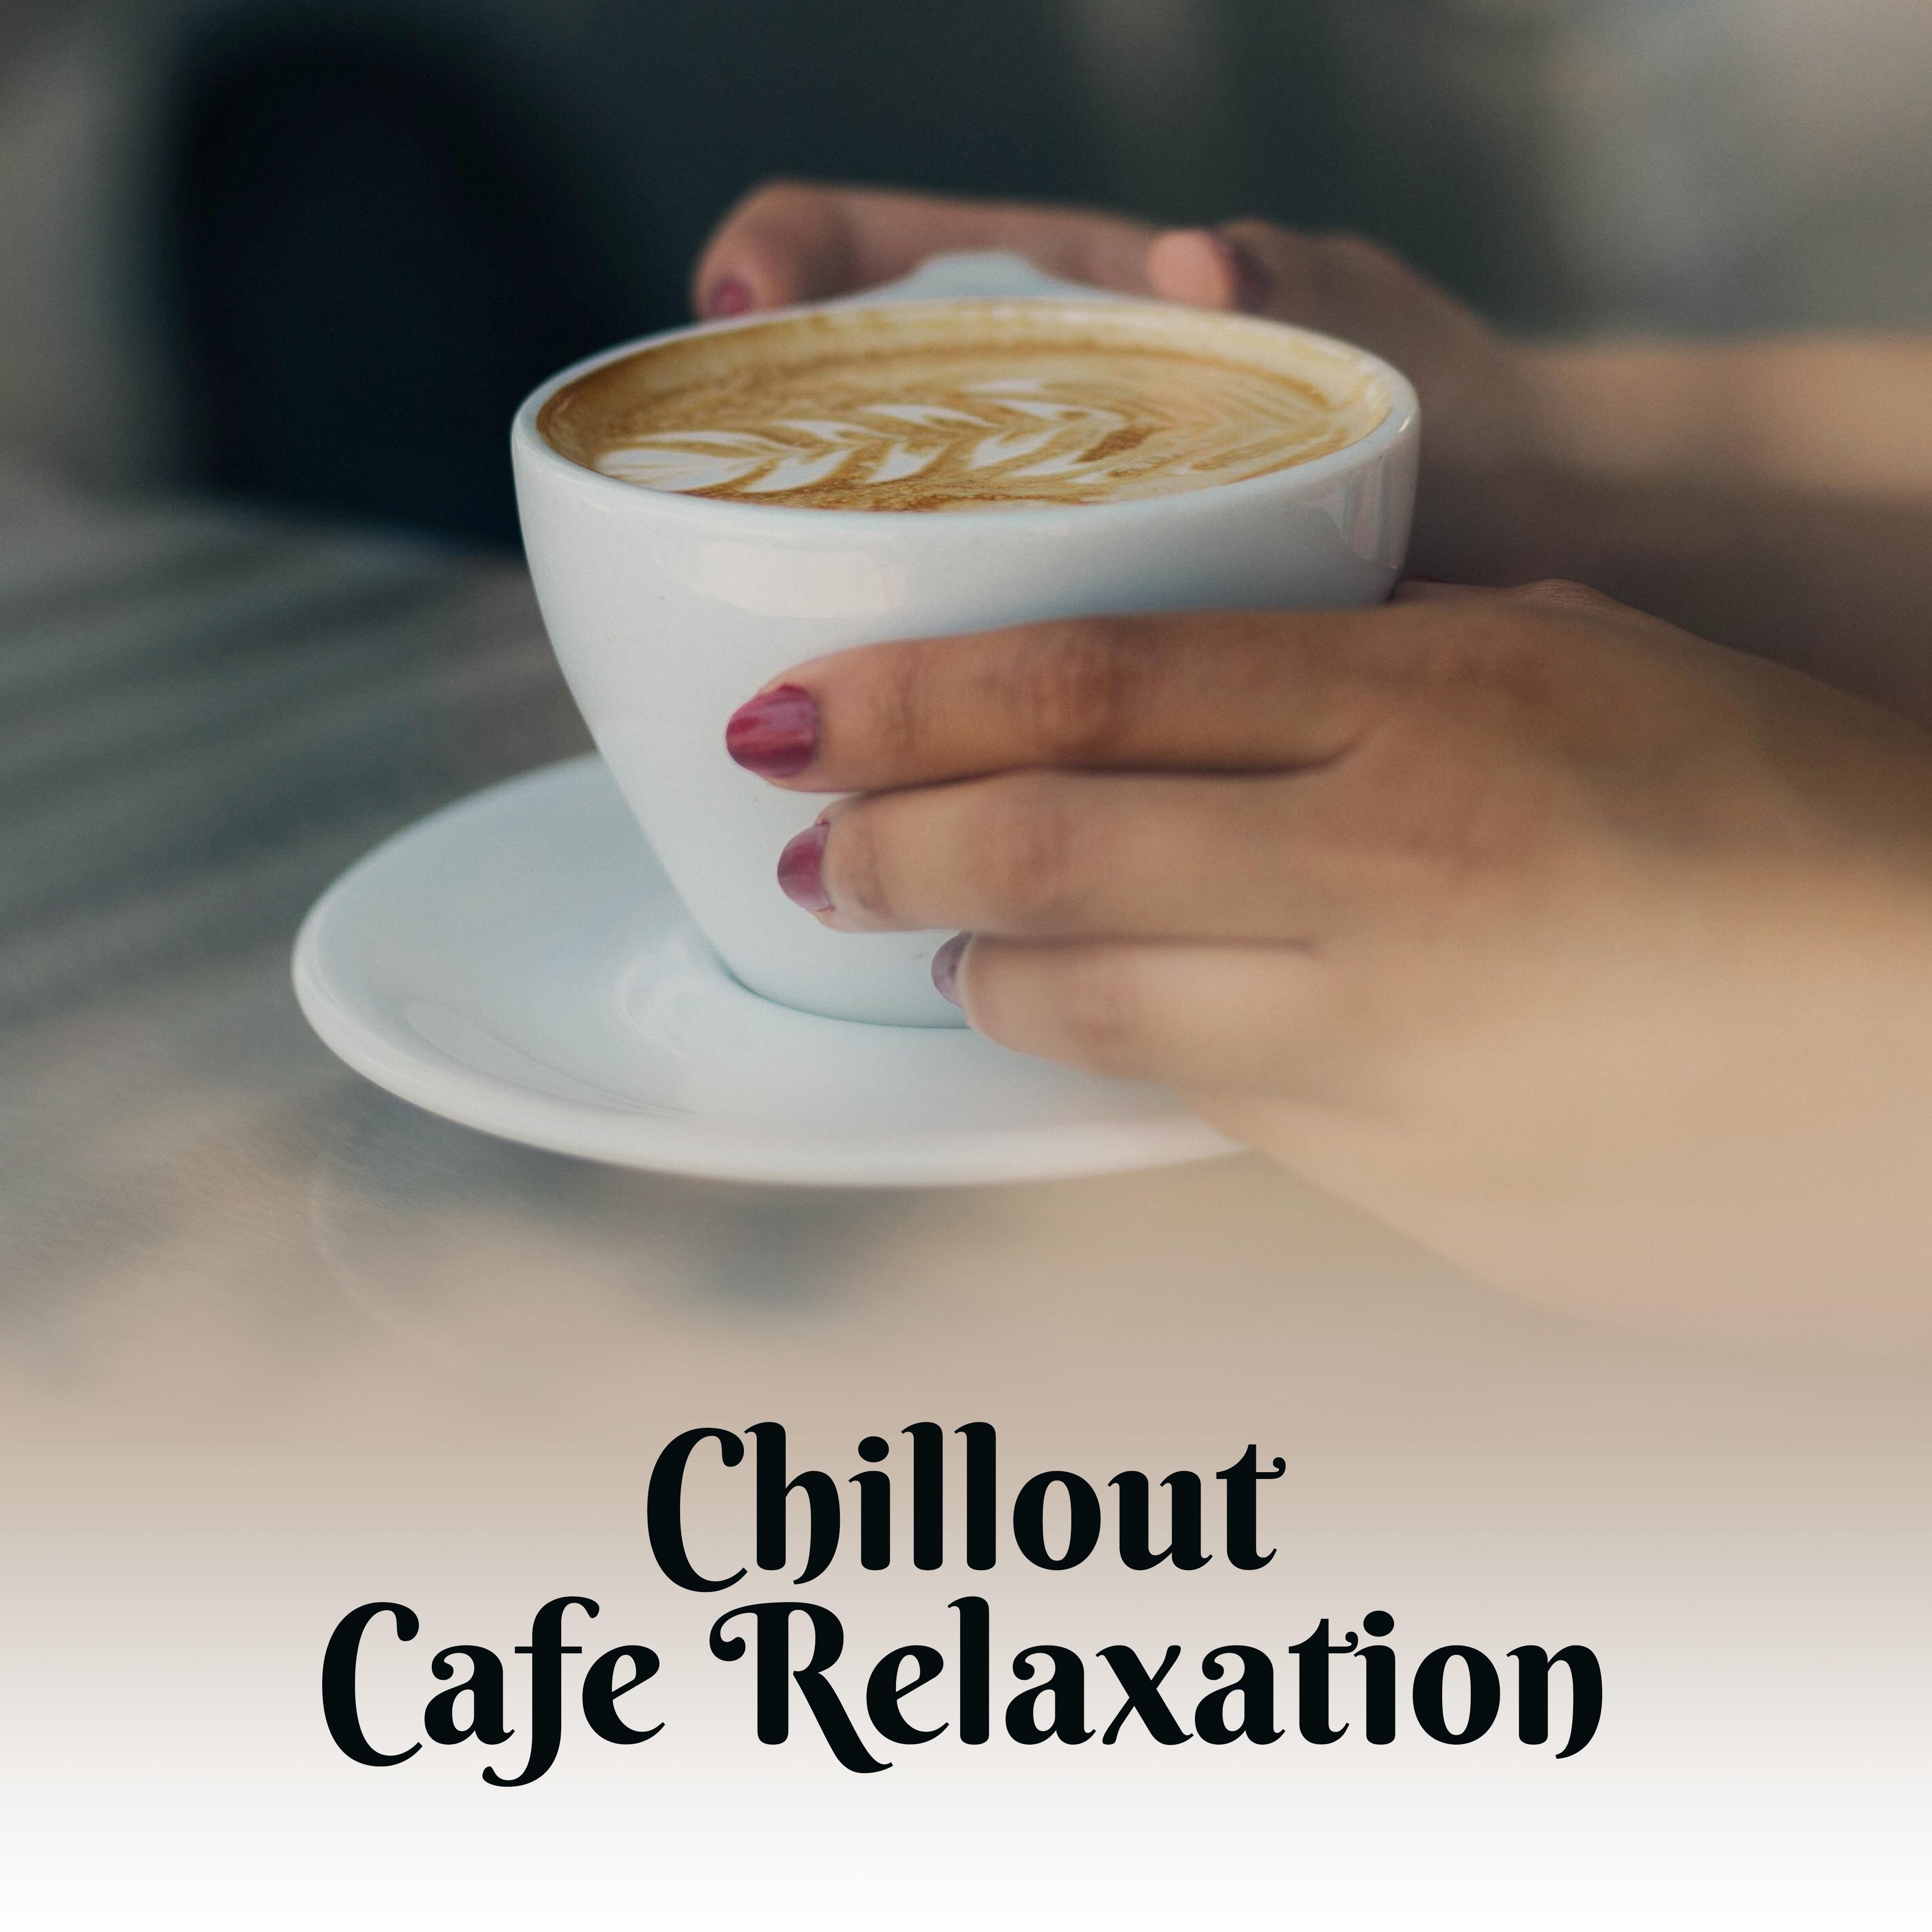 Chillout Cafe Relaxation  Beach Cafe Restaurant, Summer Lounge, Chill Out Beats, Holiday Music